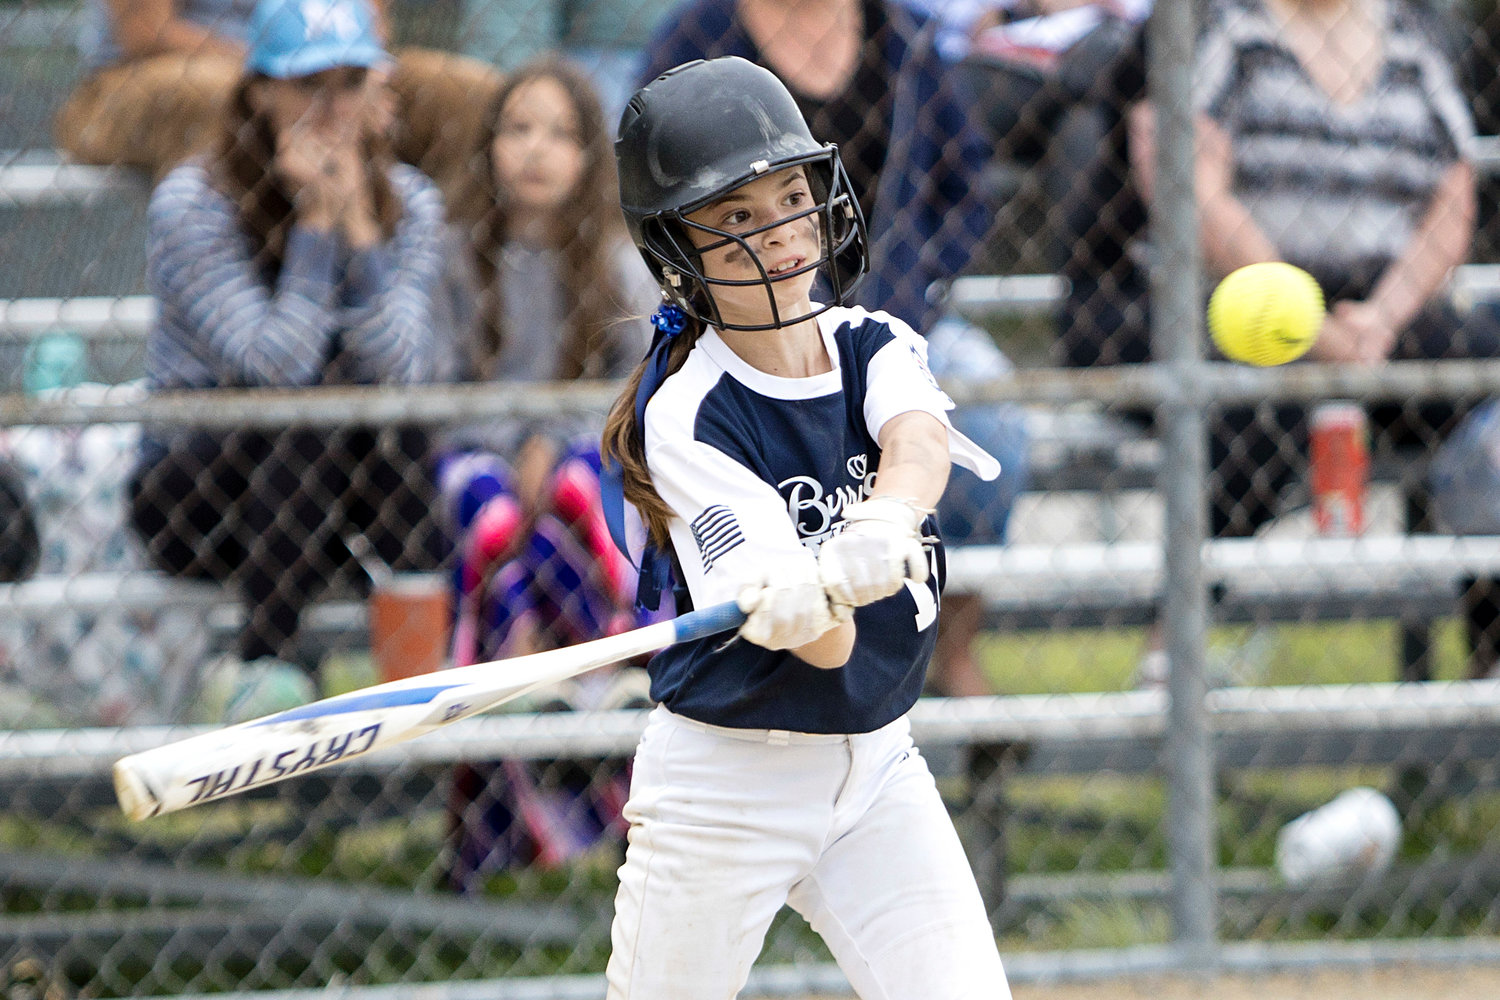 Layla Kupperman takes a swing while at bat against Middletown, Tuesday.